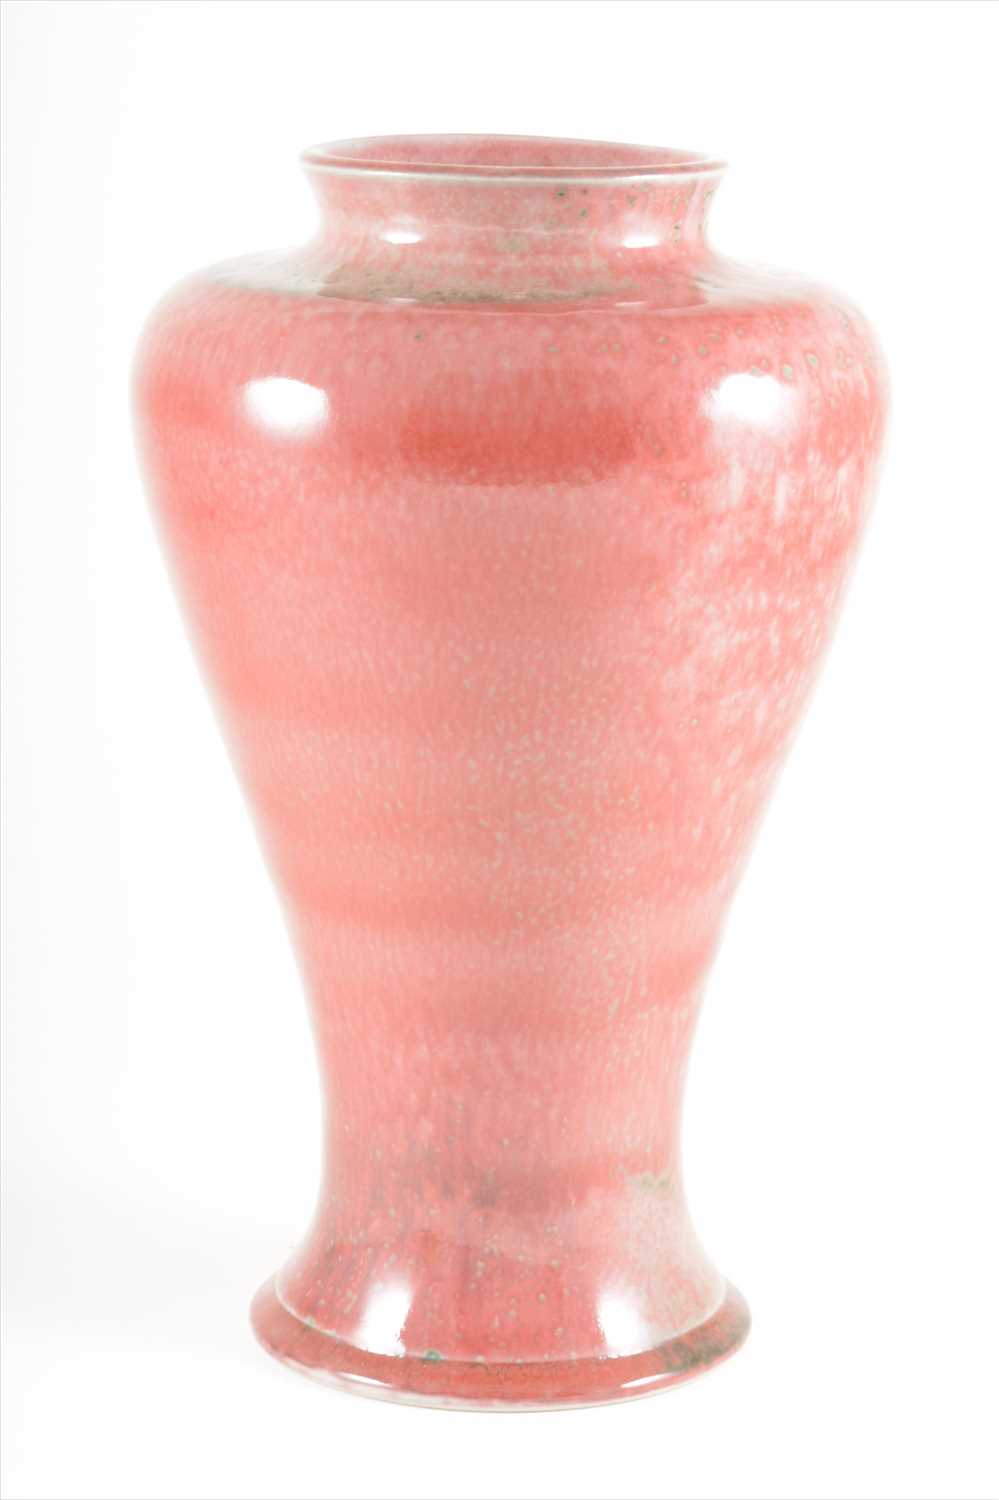 Lot 66 - A high fired vase by Cobridge Stoneware, 1998.